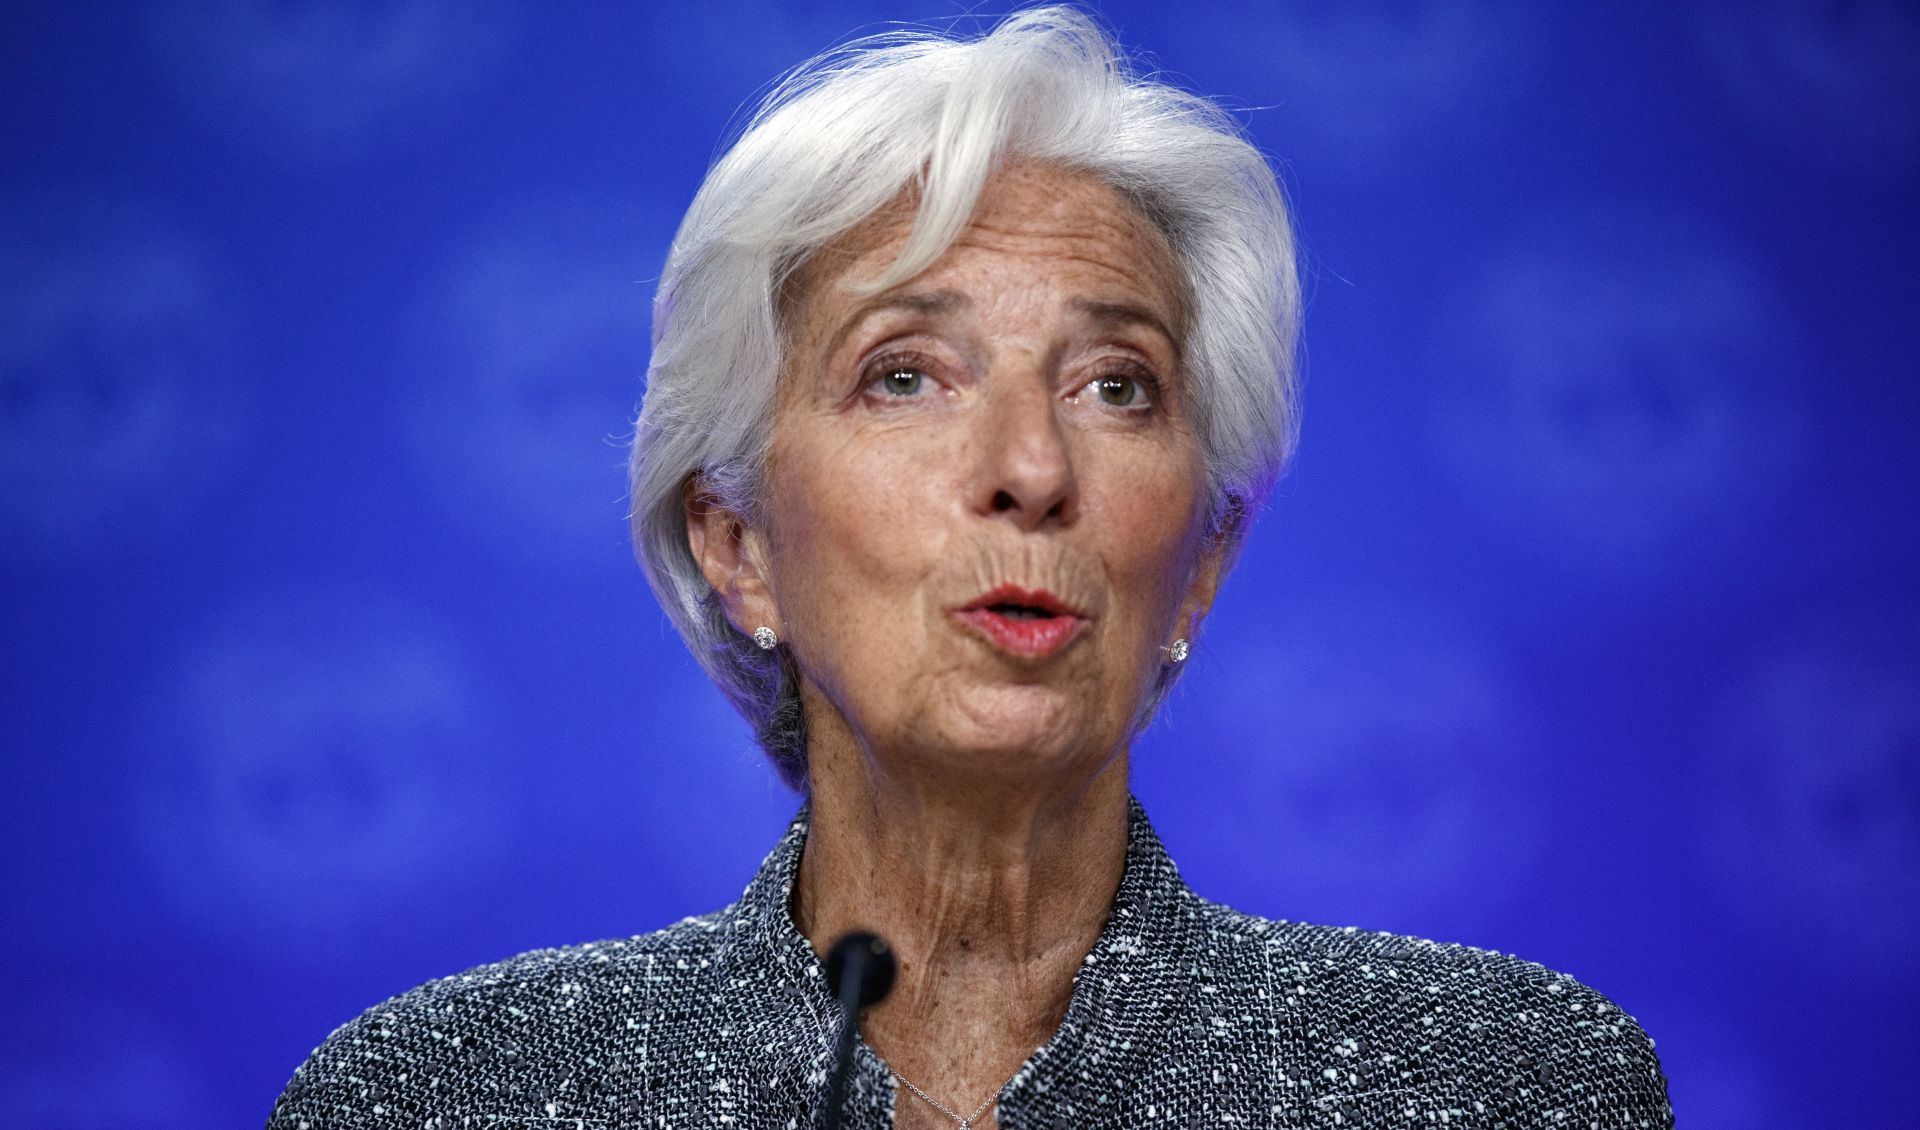 epa07690014 (FILE) - International Monetary Fund Managing Director Christine Lagarde delivers remarks during a press conference on the US economy at the International Monetary Fund headquarters in Washington, DC, USA, 06 June 2019 (reissued 02 July 2019). Reports on 02 July 2019 state French Emmanuel Macron has proposed the current chief of the International Monetary Fund (IMF), Christine Lagarde from France, as head of the European Central Bank (ECB) as European Union leaders continue their discussions in Brussels of how to fill the five important EU posts.  EPA/SHAWN THEW